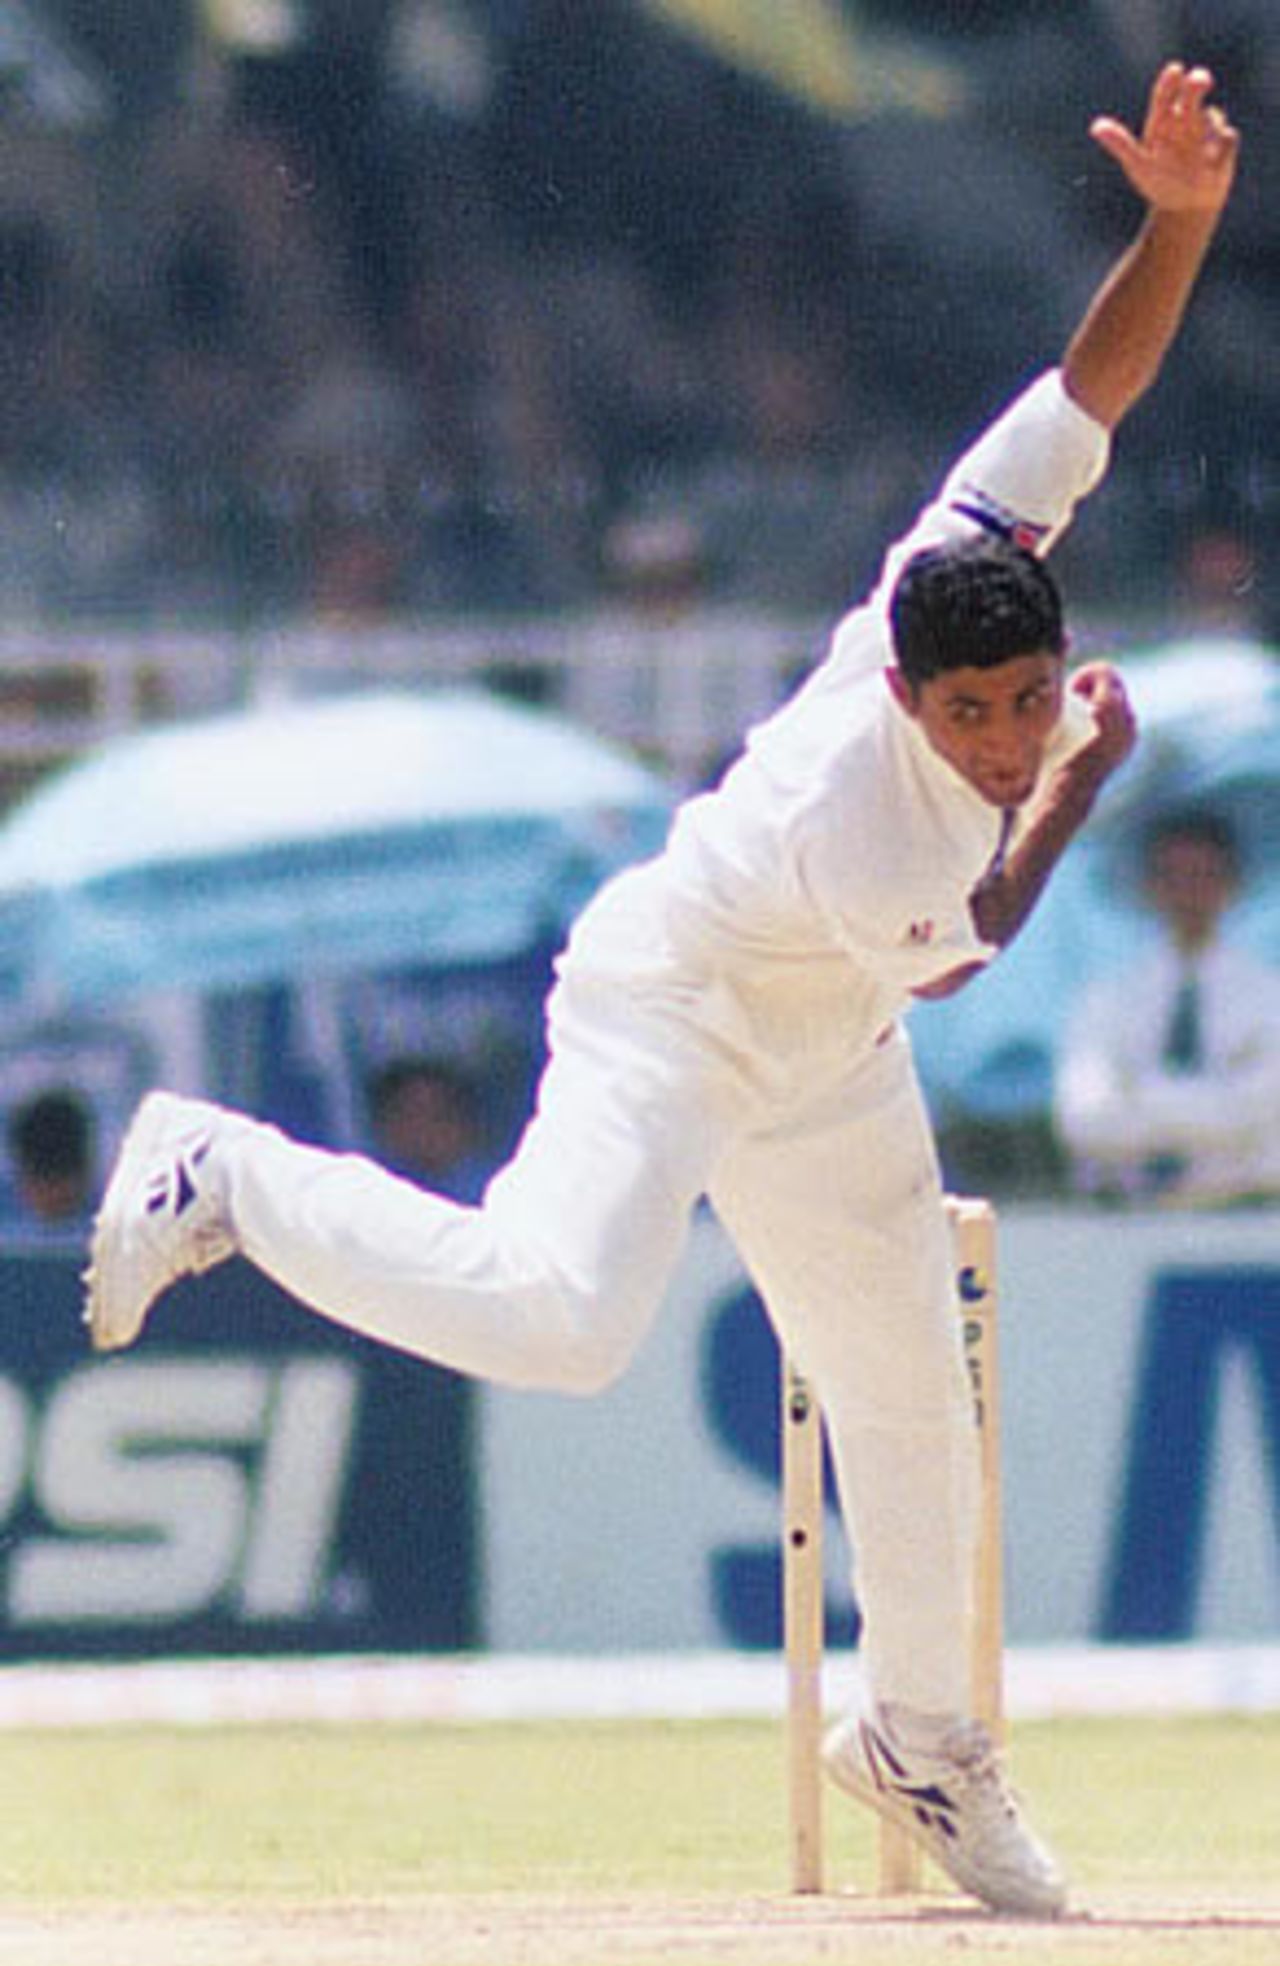 Danish Kaneria during his 5 wicket spell - New Zealand second innings, day 3, 1st Test, New Zealand v Pakistan, Gaddafi Stadium Lahore, 3 May 2002